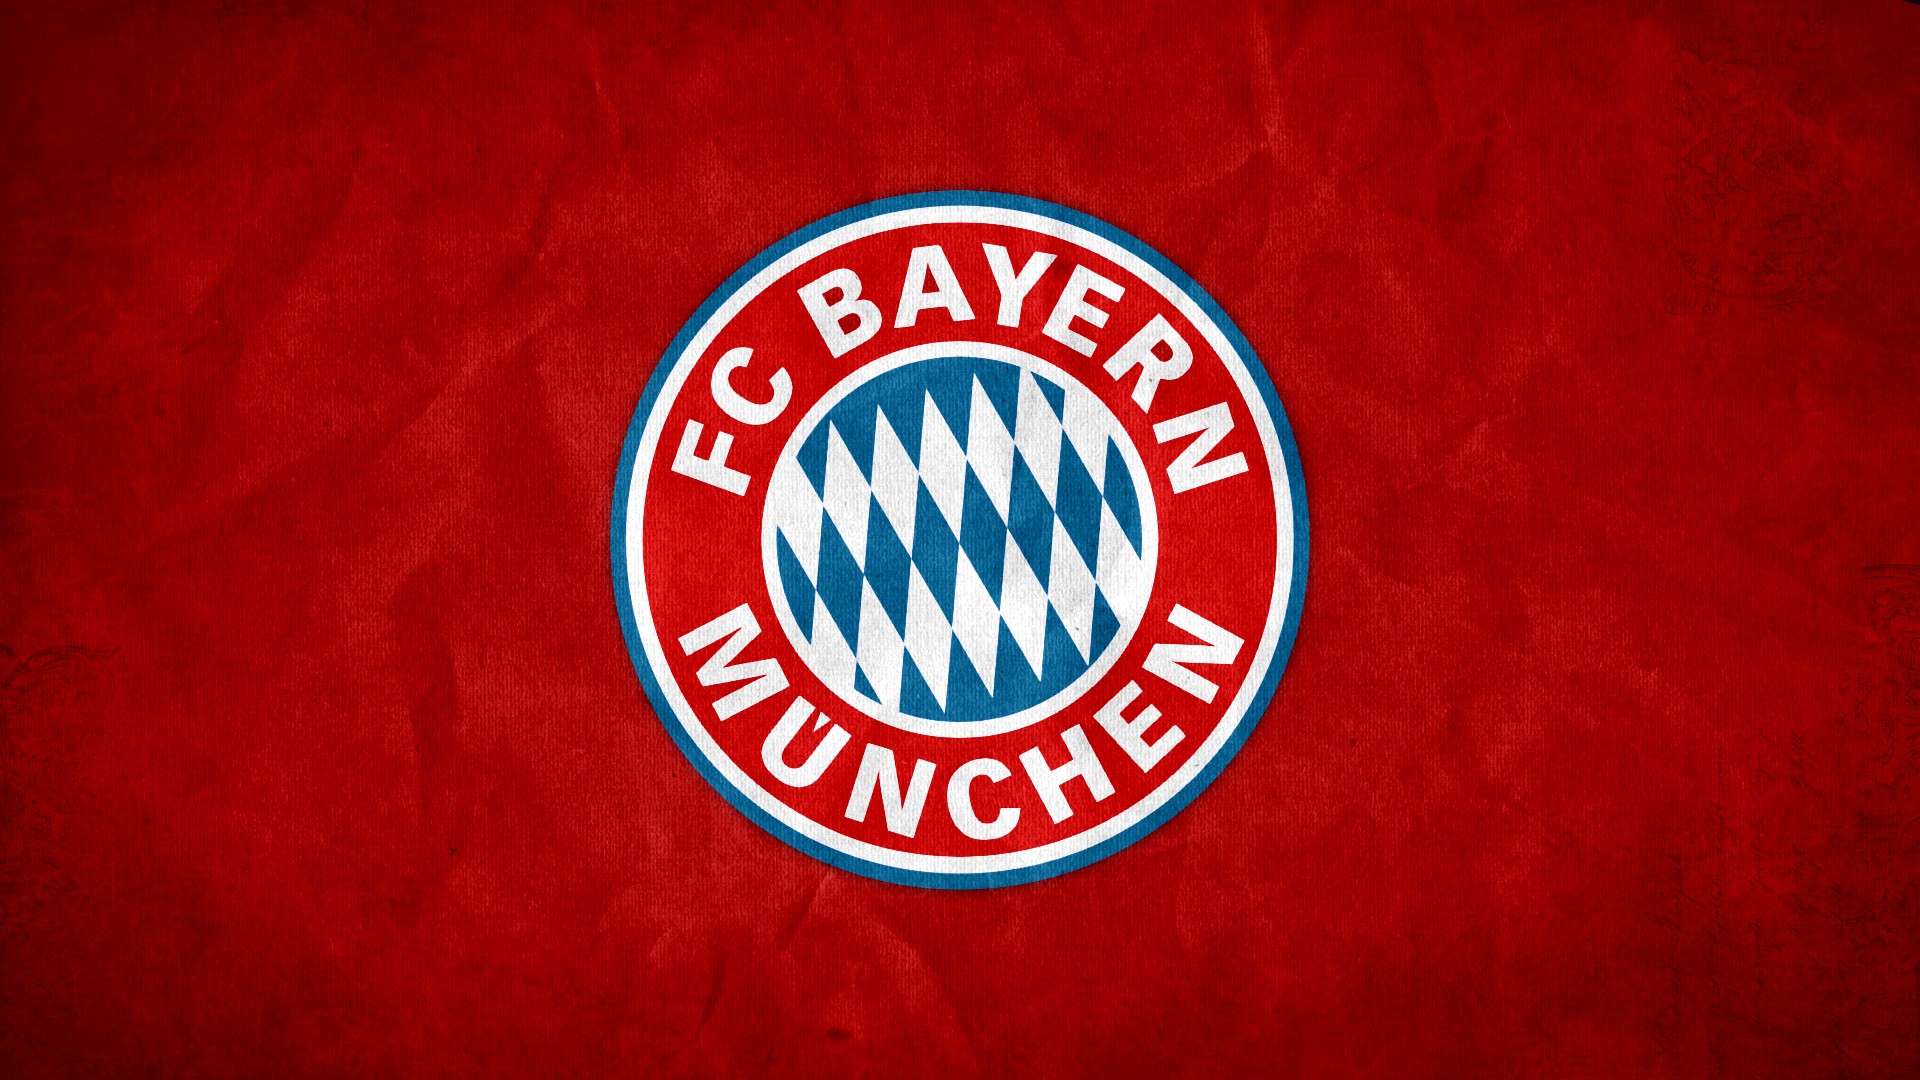 FC Bayern Munchen Wallpaper HD With Resolution 1920X1080 pixel. You can make this wallpaper for your Mac or Windows Desktop Background, iPhone, Android or Tablet and another Smartphone device for free